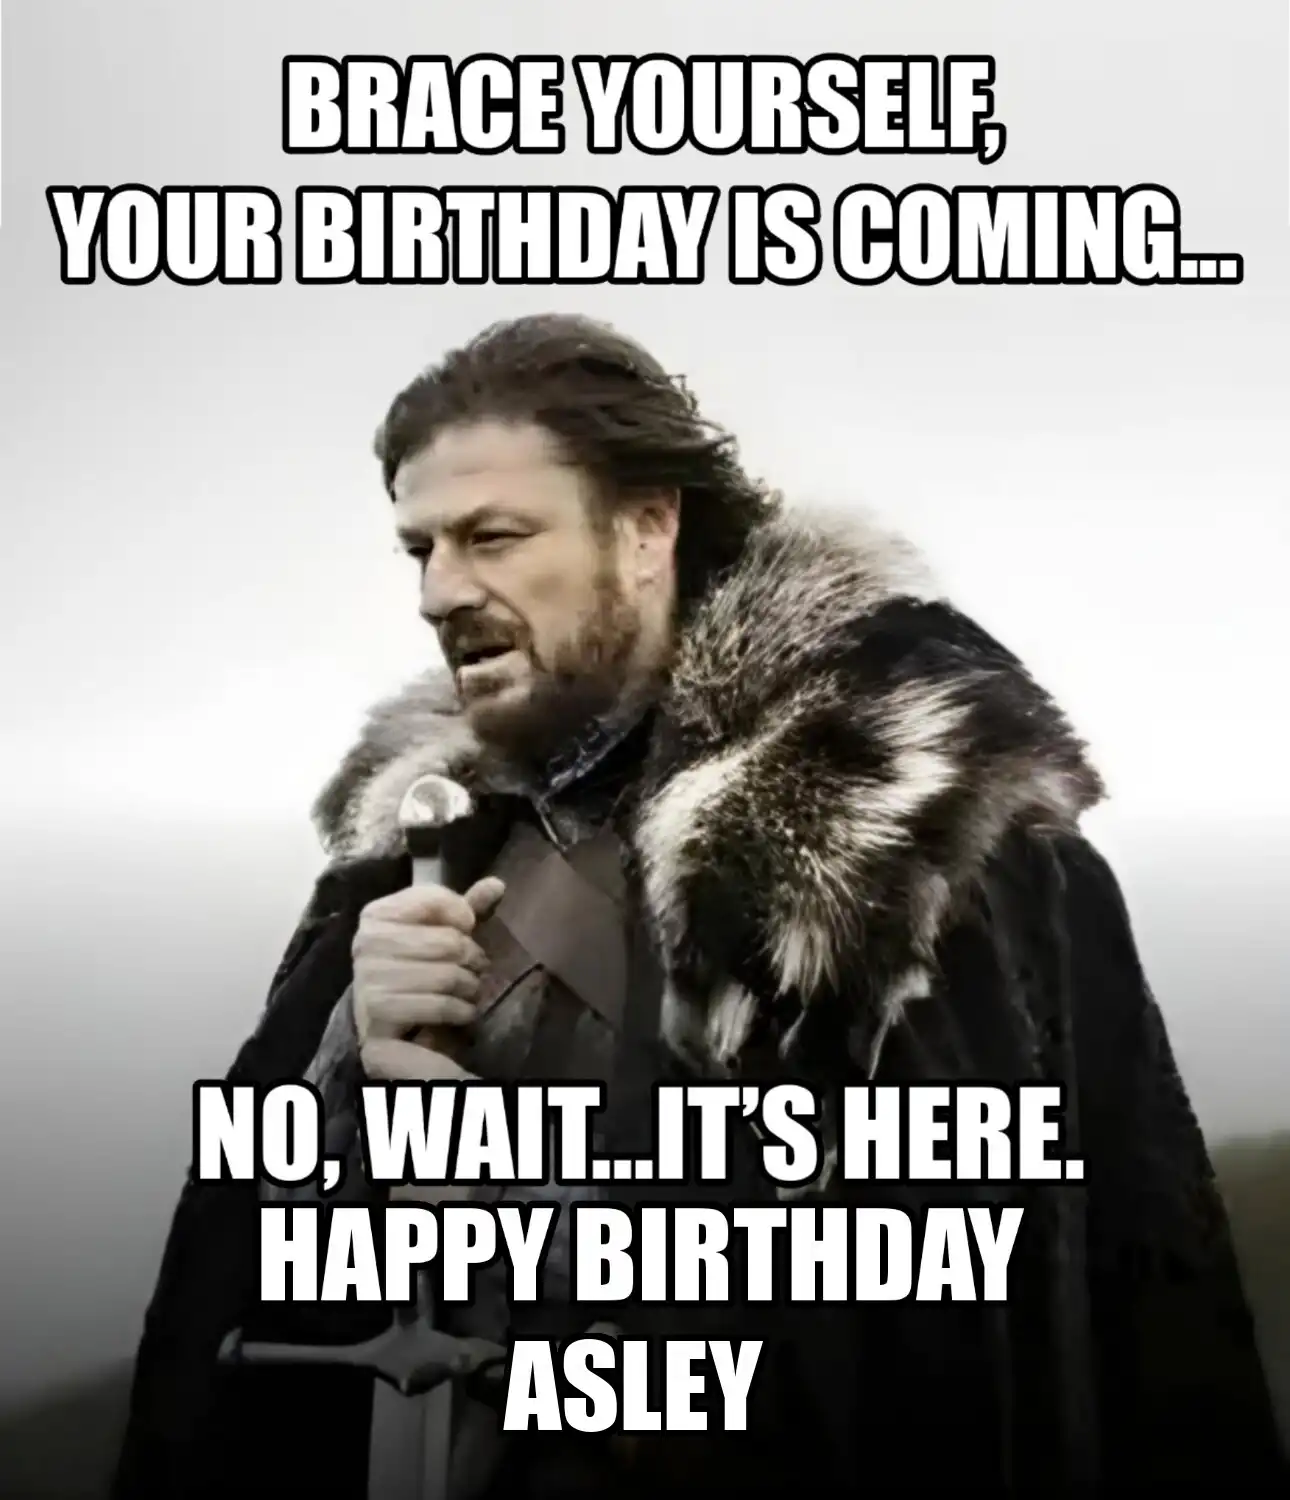 Happy Birthday Asley Brace Yourself Your Birthday Is Coming Meme